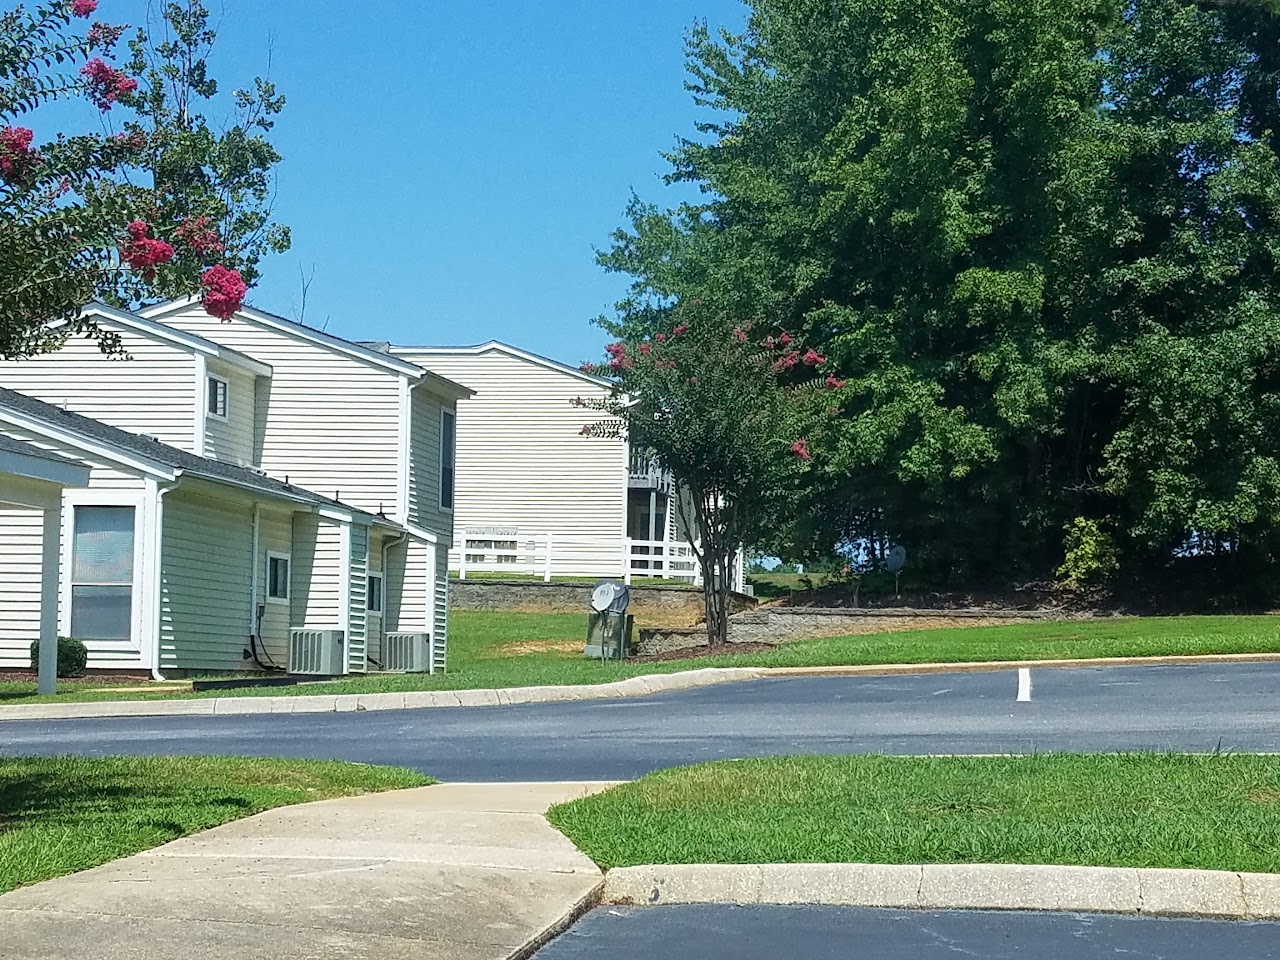 Photo of TIMBER SPRINGS APTS. Affordable housing located at 501 HOLLY SPRINGS RD HOLLY SPRINGS, NC 27540